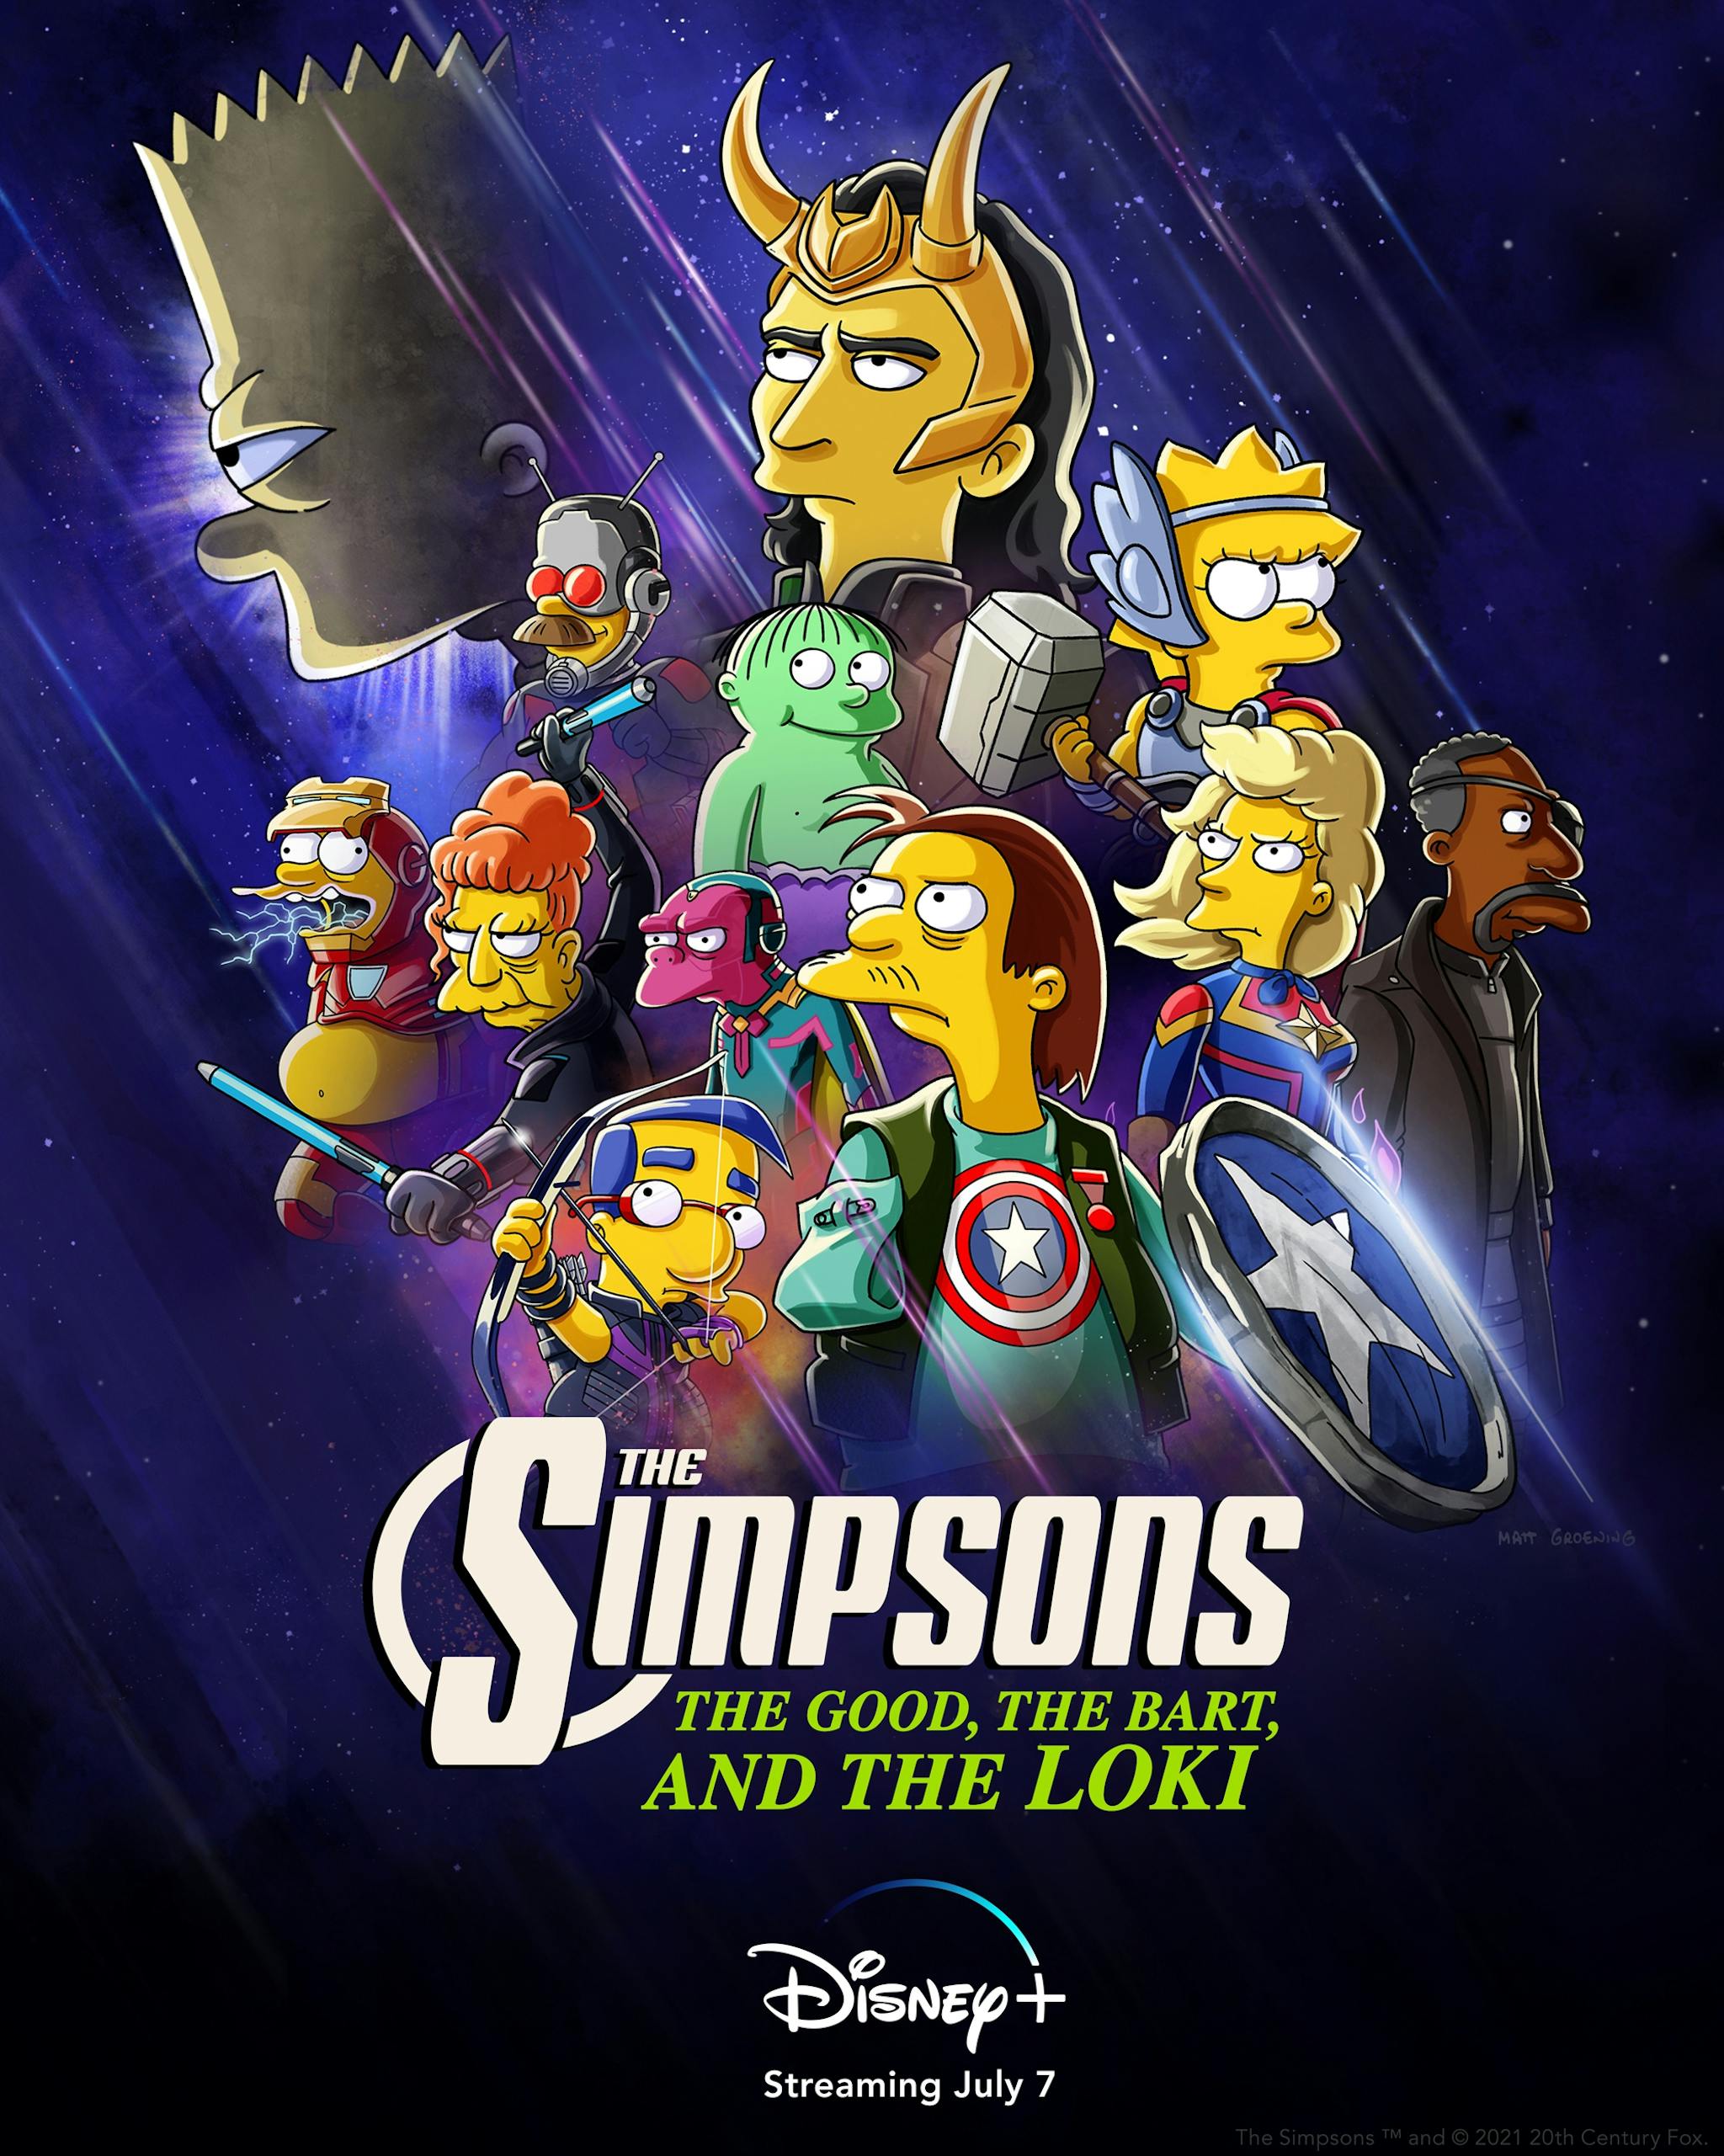 The Simpsons The Good The Bad And The Loki poster 2021